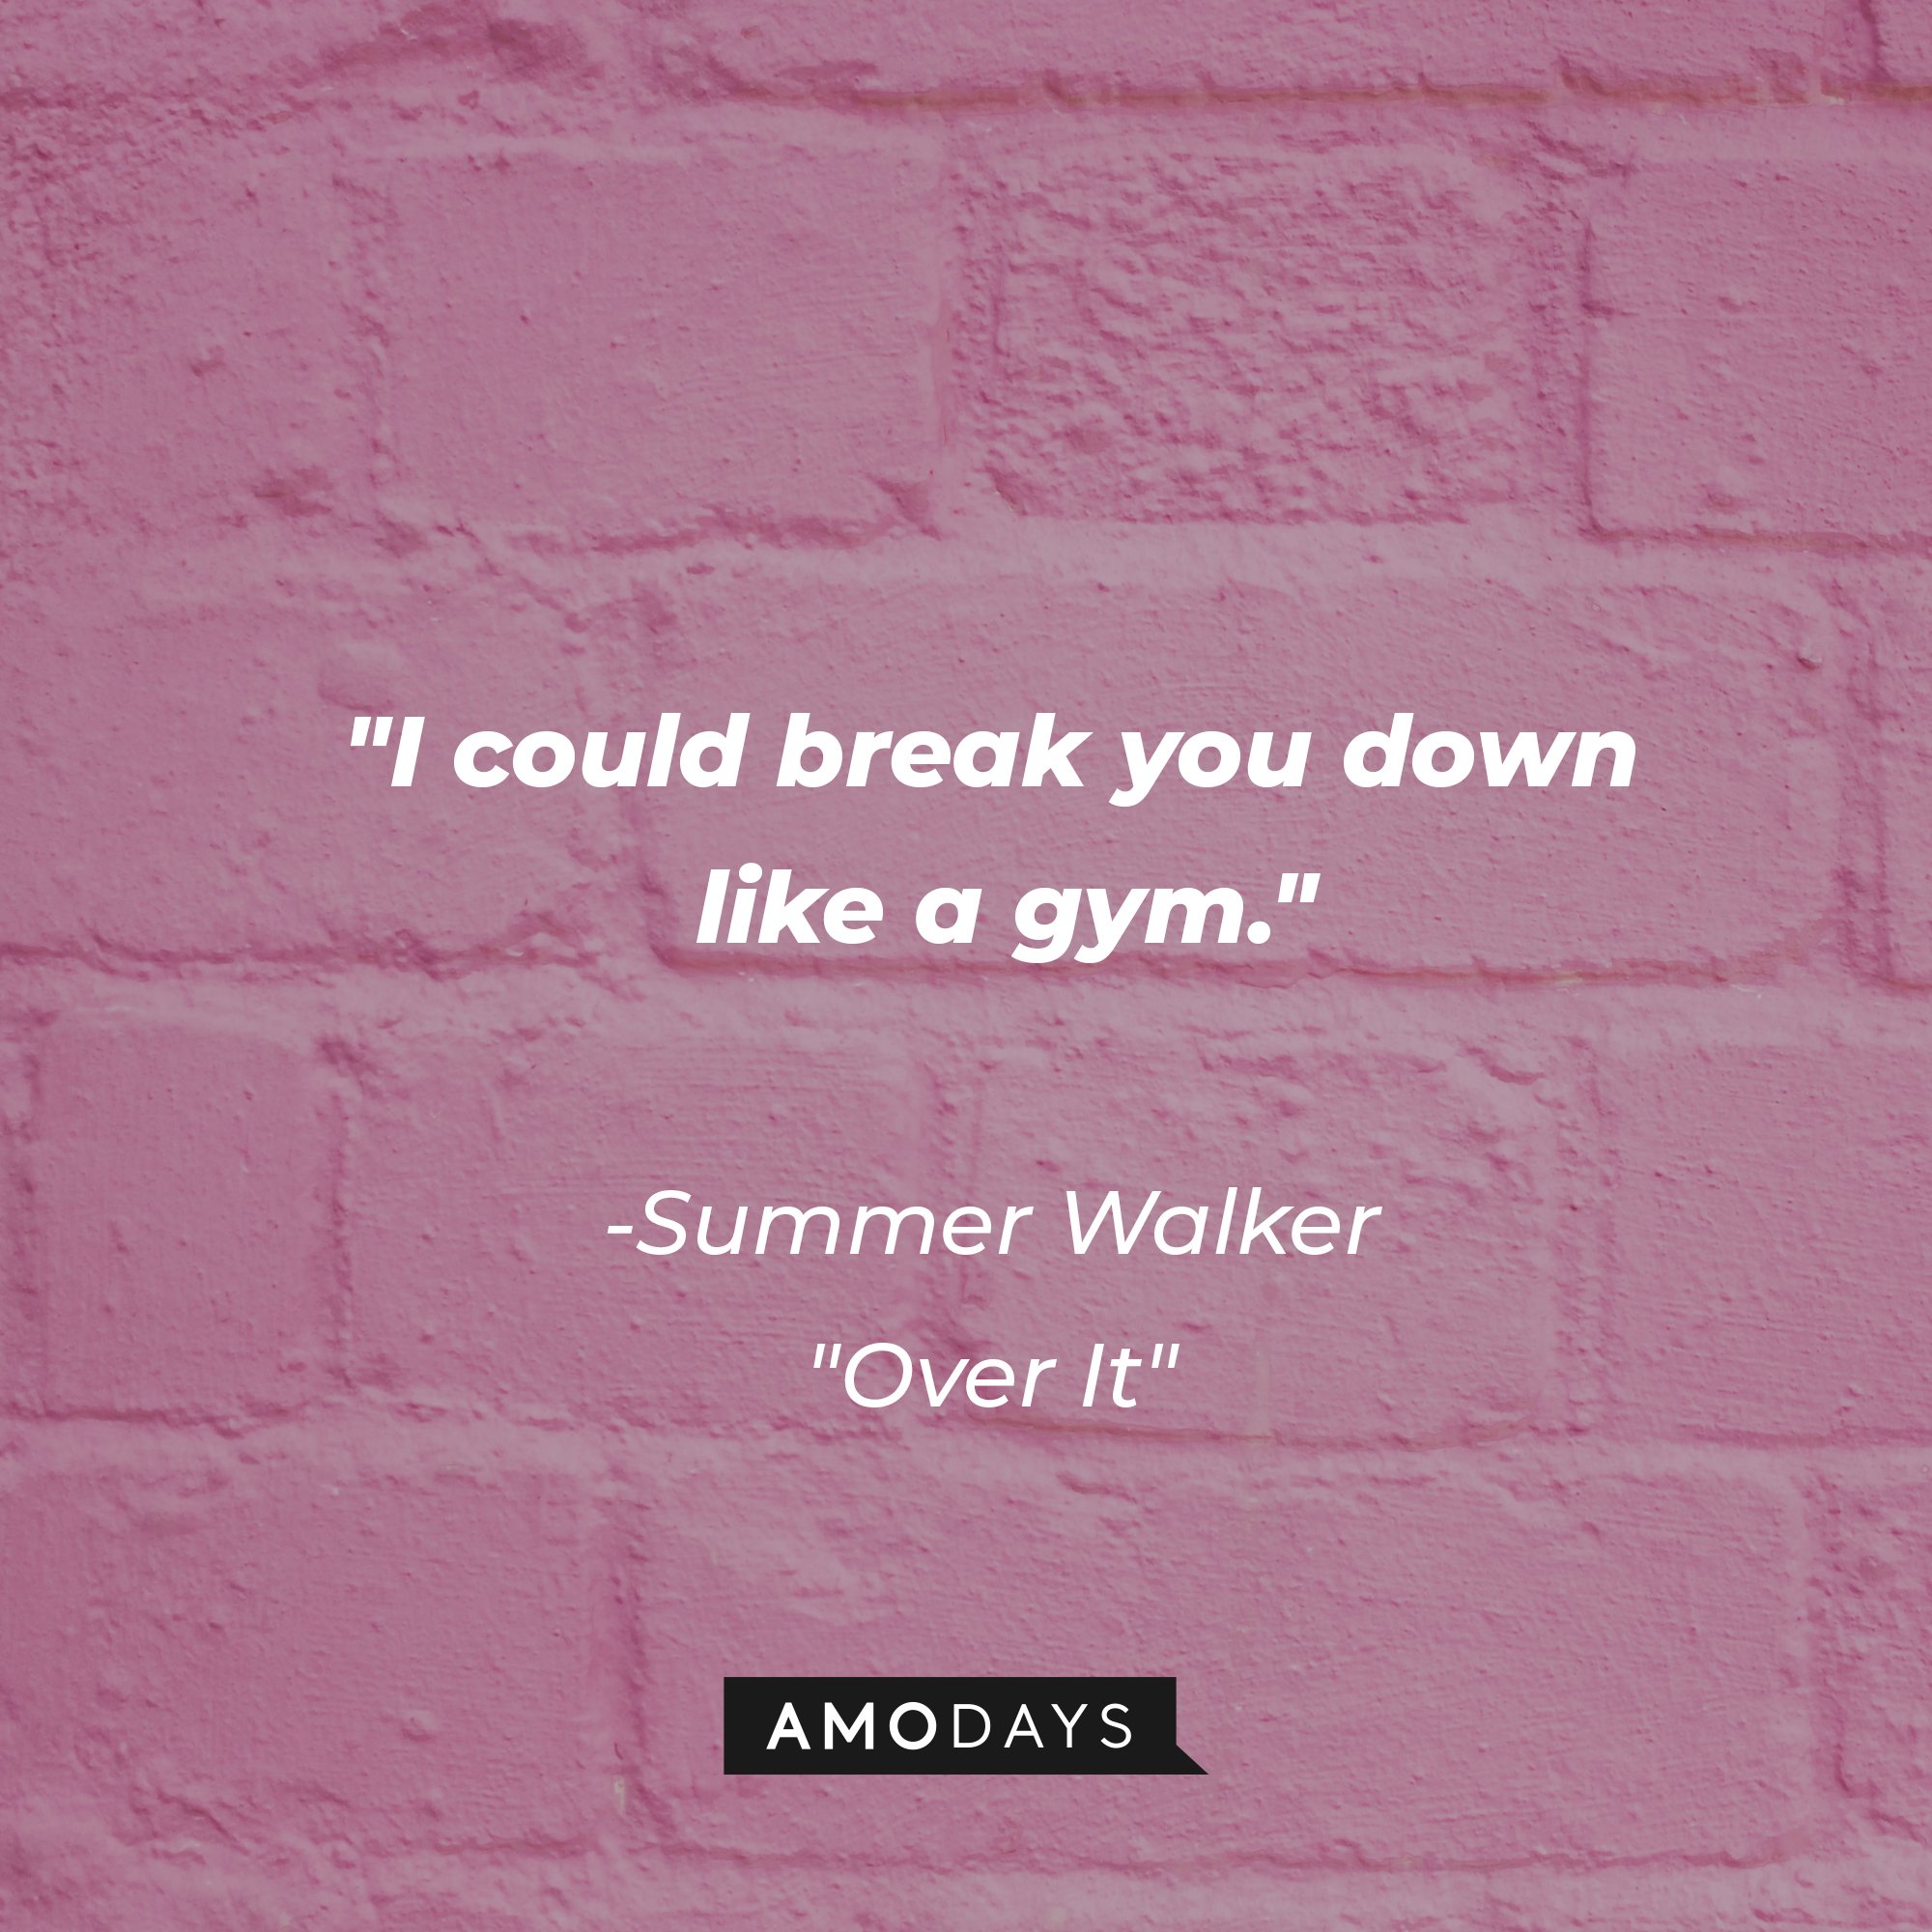 Summer Walker's "Over It" quote: "I could break you down like a gym." | Image: AmoDays